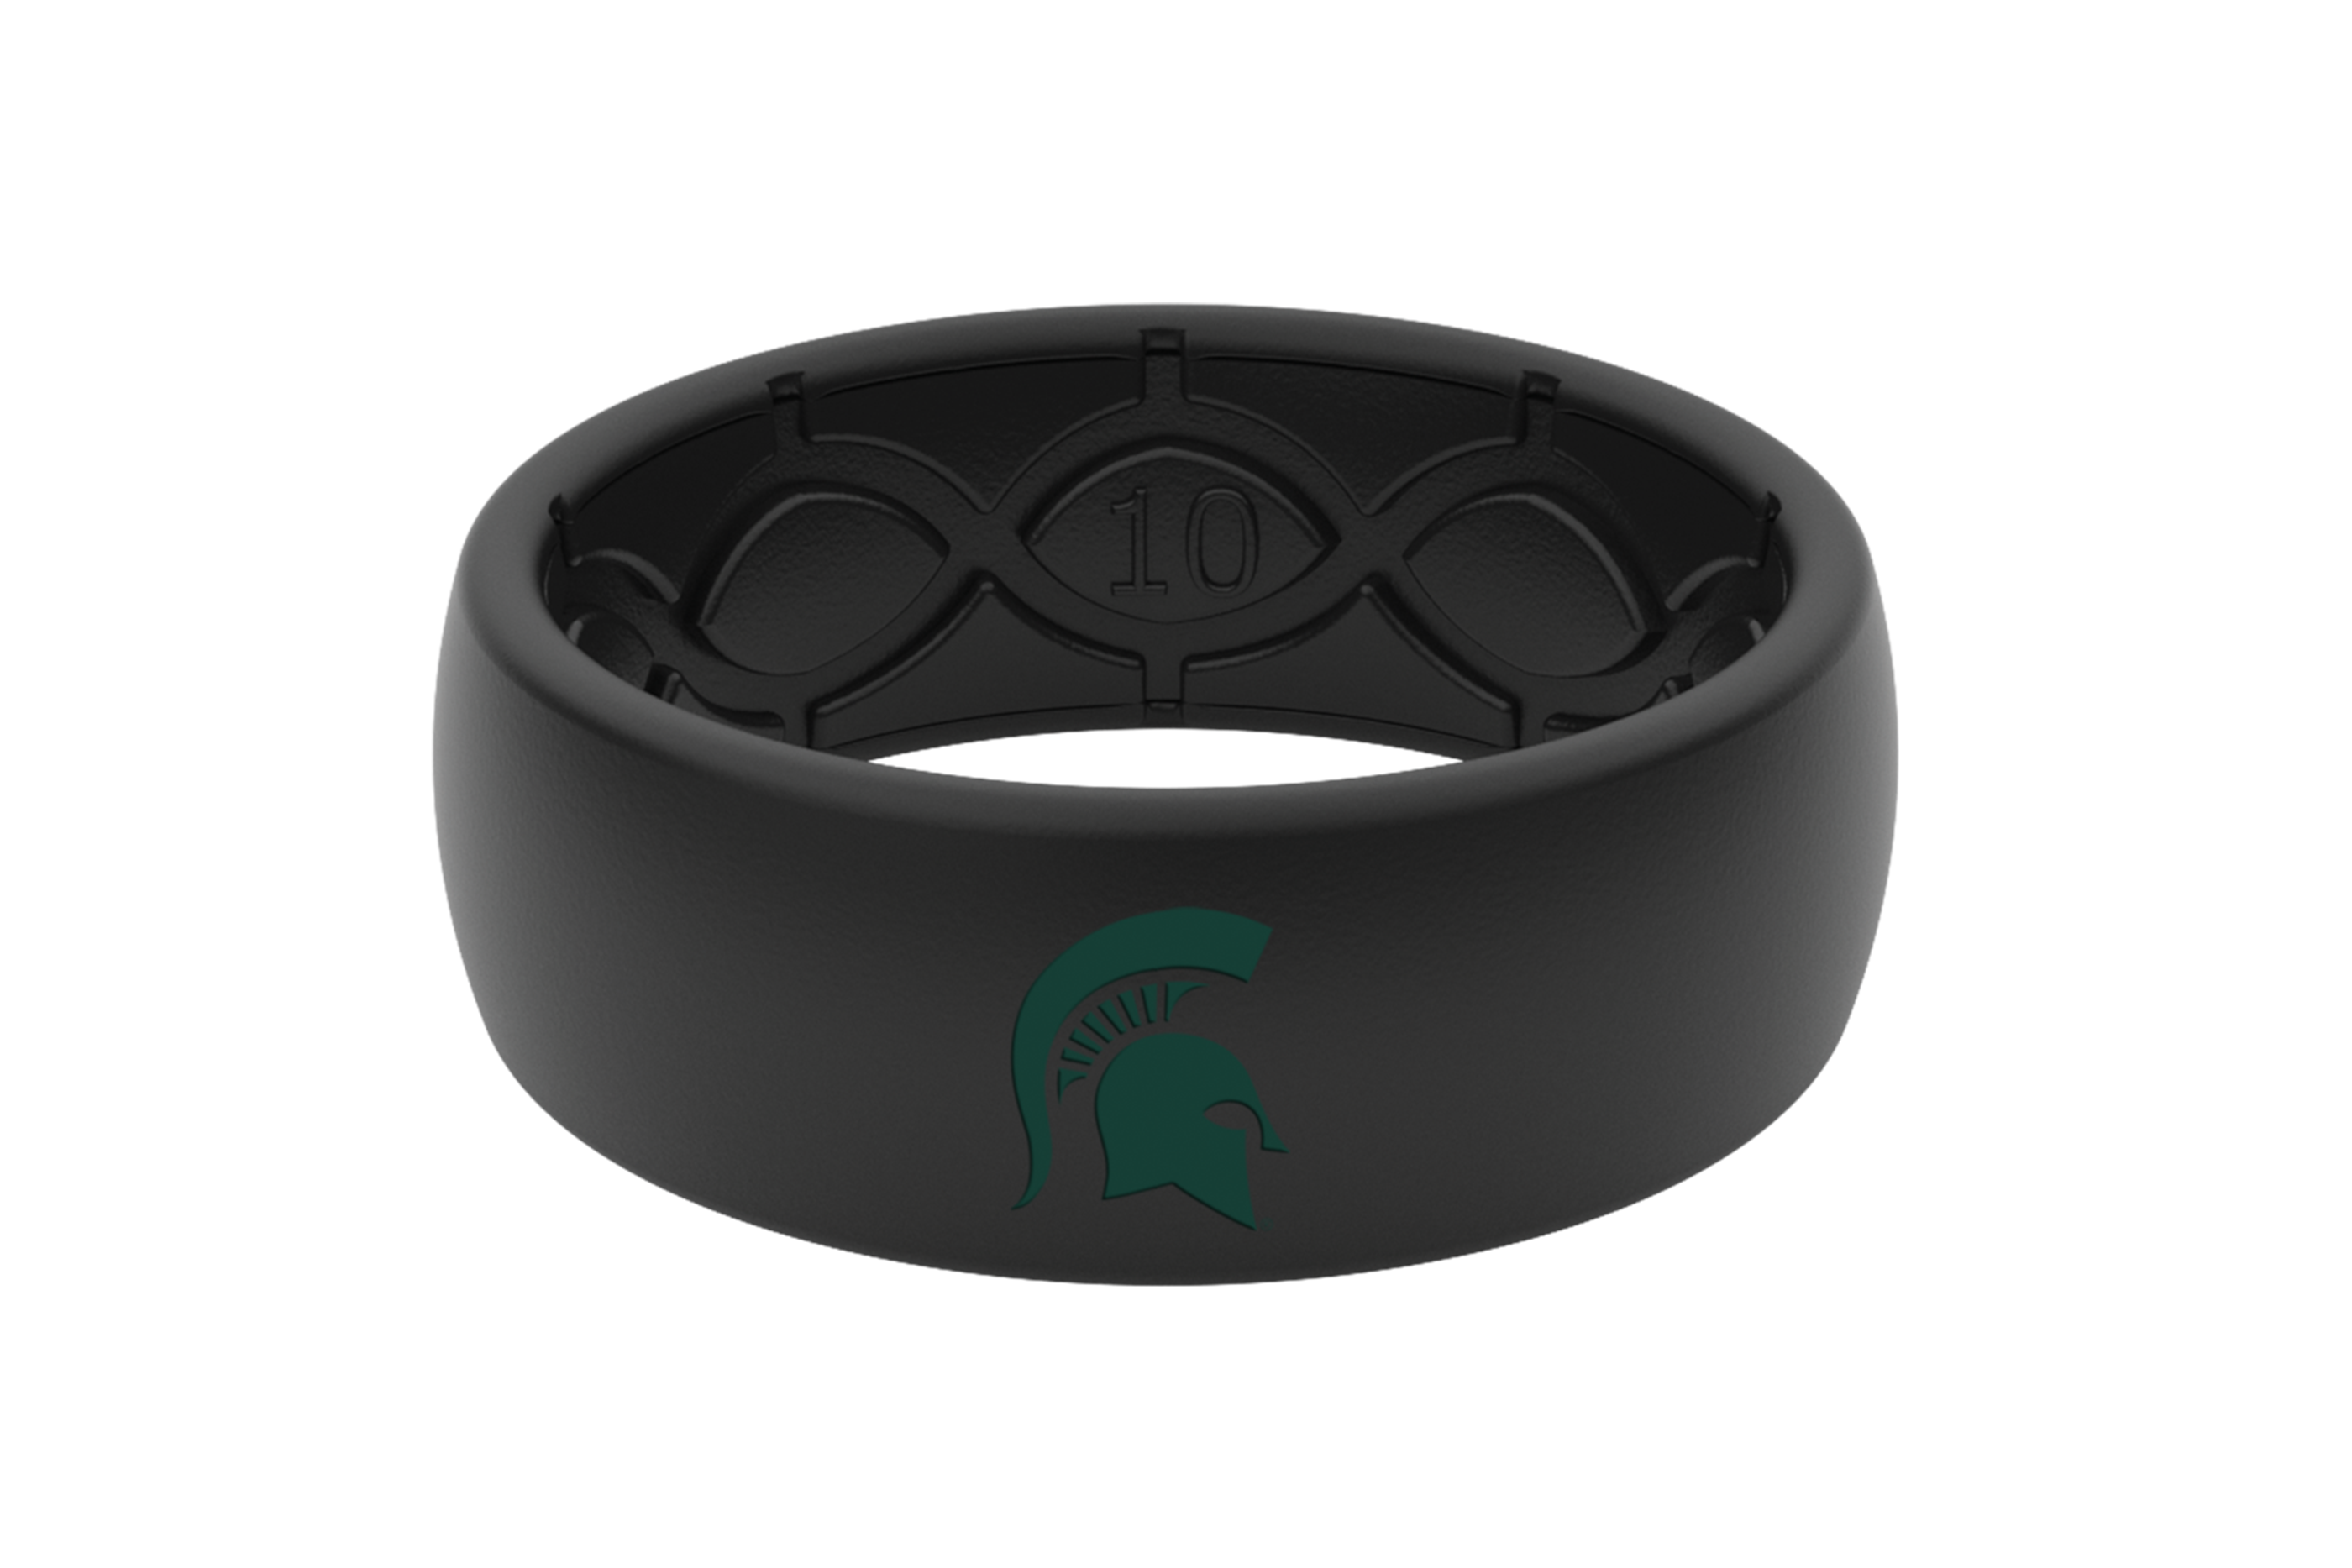 Original College Michigan State Black Color Fill viewed front on